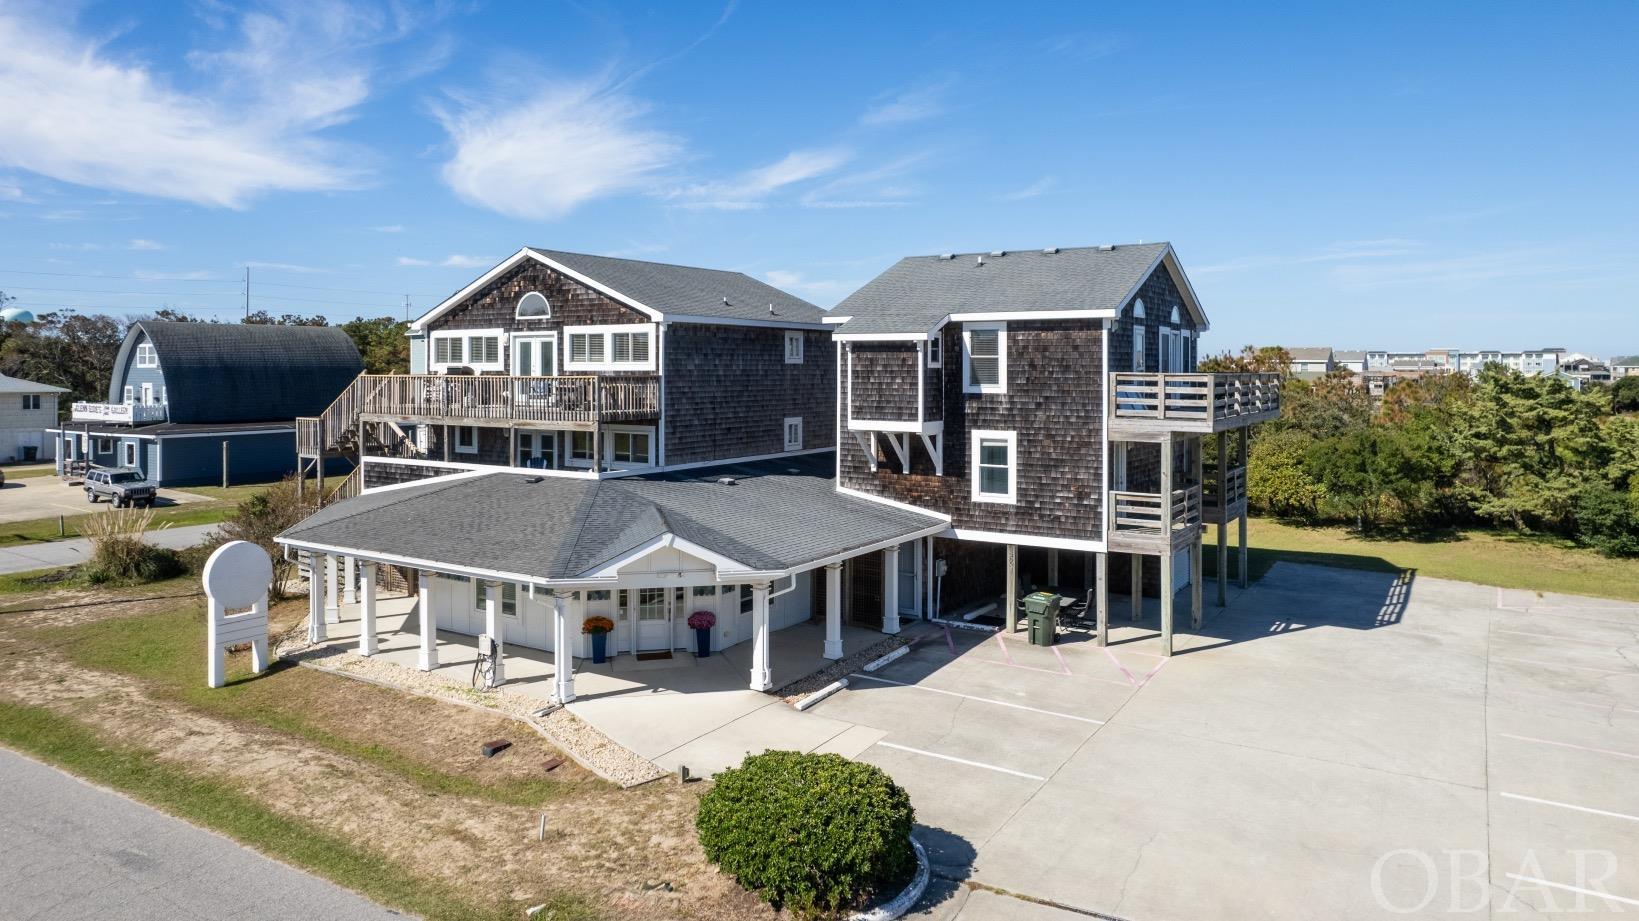 INVESTMENT OPPORTUNITY!!  Discover the allure of this exceptional property featuring two distinct 4-bedroom residences accompanied by versatile commercial space in the coveted Gallery Row District in Nags Head.  Situated on 2 full lots, this is a truly unique opportunity on the Outer Banks. Whether you choose to maximize rental potential across all three spaces, establish a live-work dynamic by residing in one unit while operating a business in the commercial space and renting the other unit, the possibilities are endless!  The east unit offers an upper-level great room inclusive of a primary bedroom with a generous walk-in closet and bath. The mid-level encompasses three additional bedrooms and two bathrooms, with laundry conveniently situated on the first level. The west unit is fully furnished and ready for guests! The top level offers a kitchen, living area, primary bedroom, and a bonus room along with a full hall bath. The mid-level hosts three more bedrooms, two baths, a secondary living space complete w/ a mini-theatre set up, foosball, and laundry.  Both units seamlessly integrate outdoor living with expansive decks offering a bit of an ocean view and a great place to relax. An outdoor shower adds a necessary convenience for you and your guests. The commercial space on the ground level offers an open floor plan, ample storage, a half bath and parking for up to 15 vehicles.  Perfectly positioned just three lots from the beach, this property is within walking distance to local gems like Red Drum and just a very short drive to Kill Devil Grill and Swells'a Brewing Company.  Not to mention you are in the heart of Gallery Row where you can stroll through the galleries and shops of local artists like the Glenn Eure Gallery and Seagreen Gallery.  It's just an awesome location!  Immerse yourself in the possibilities of this amazing property!